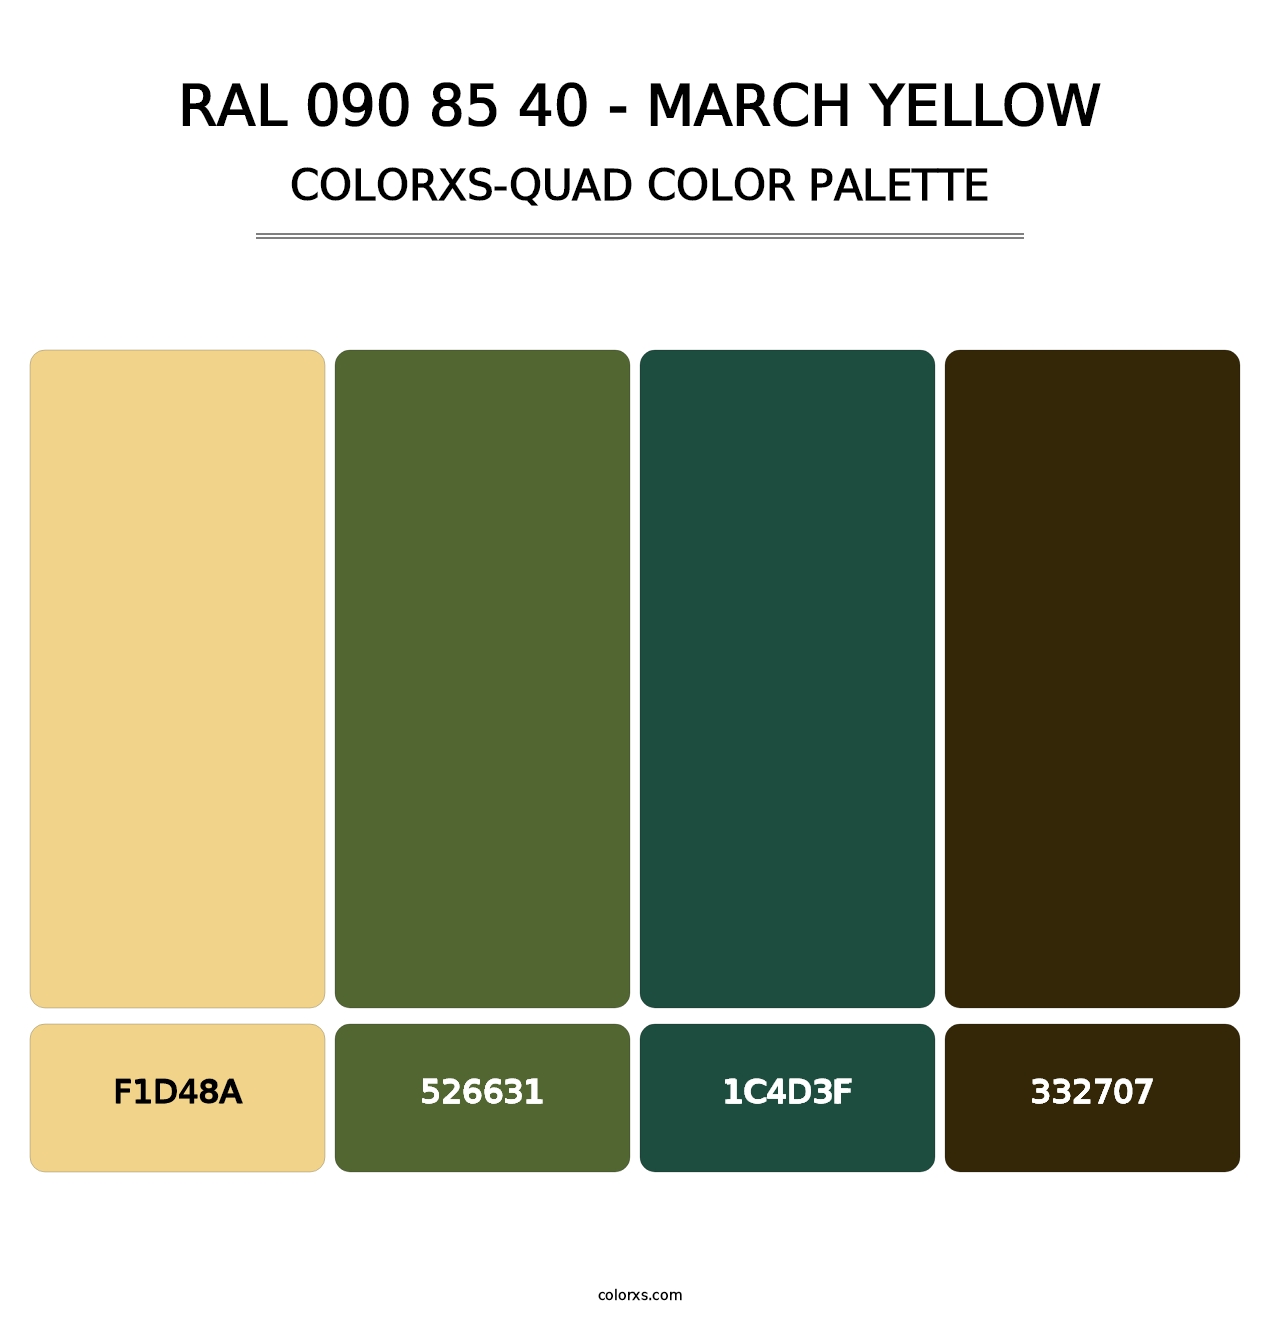 RAL 090 85 40 - March Yellow - Colorxs Quad Palette